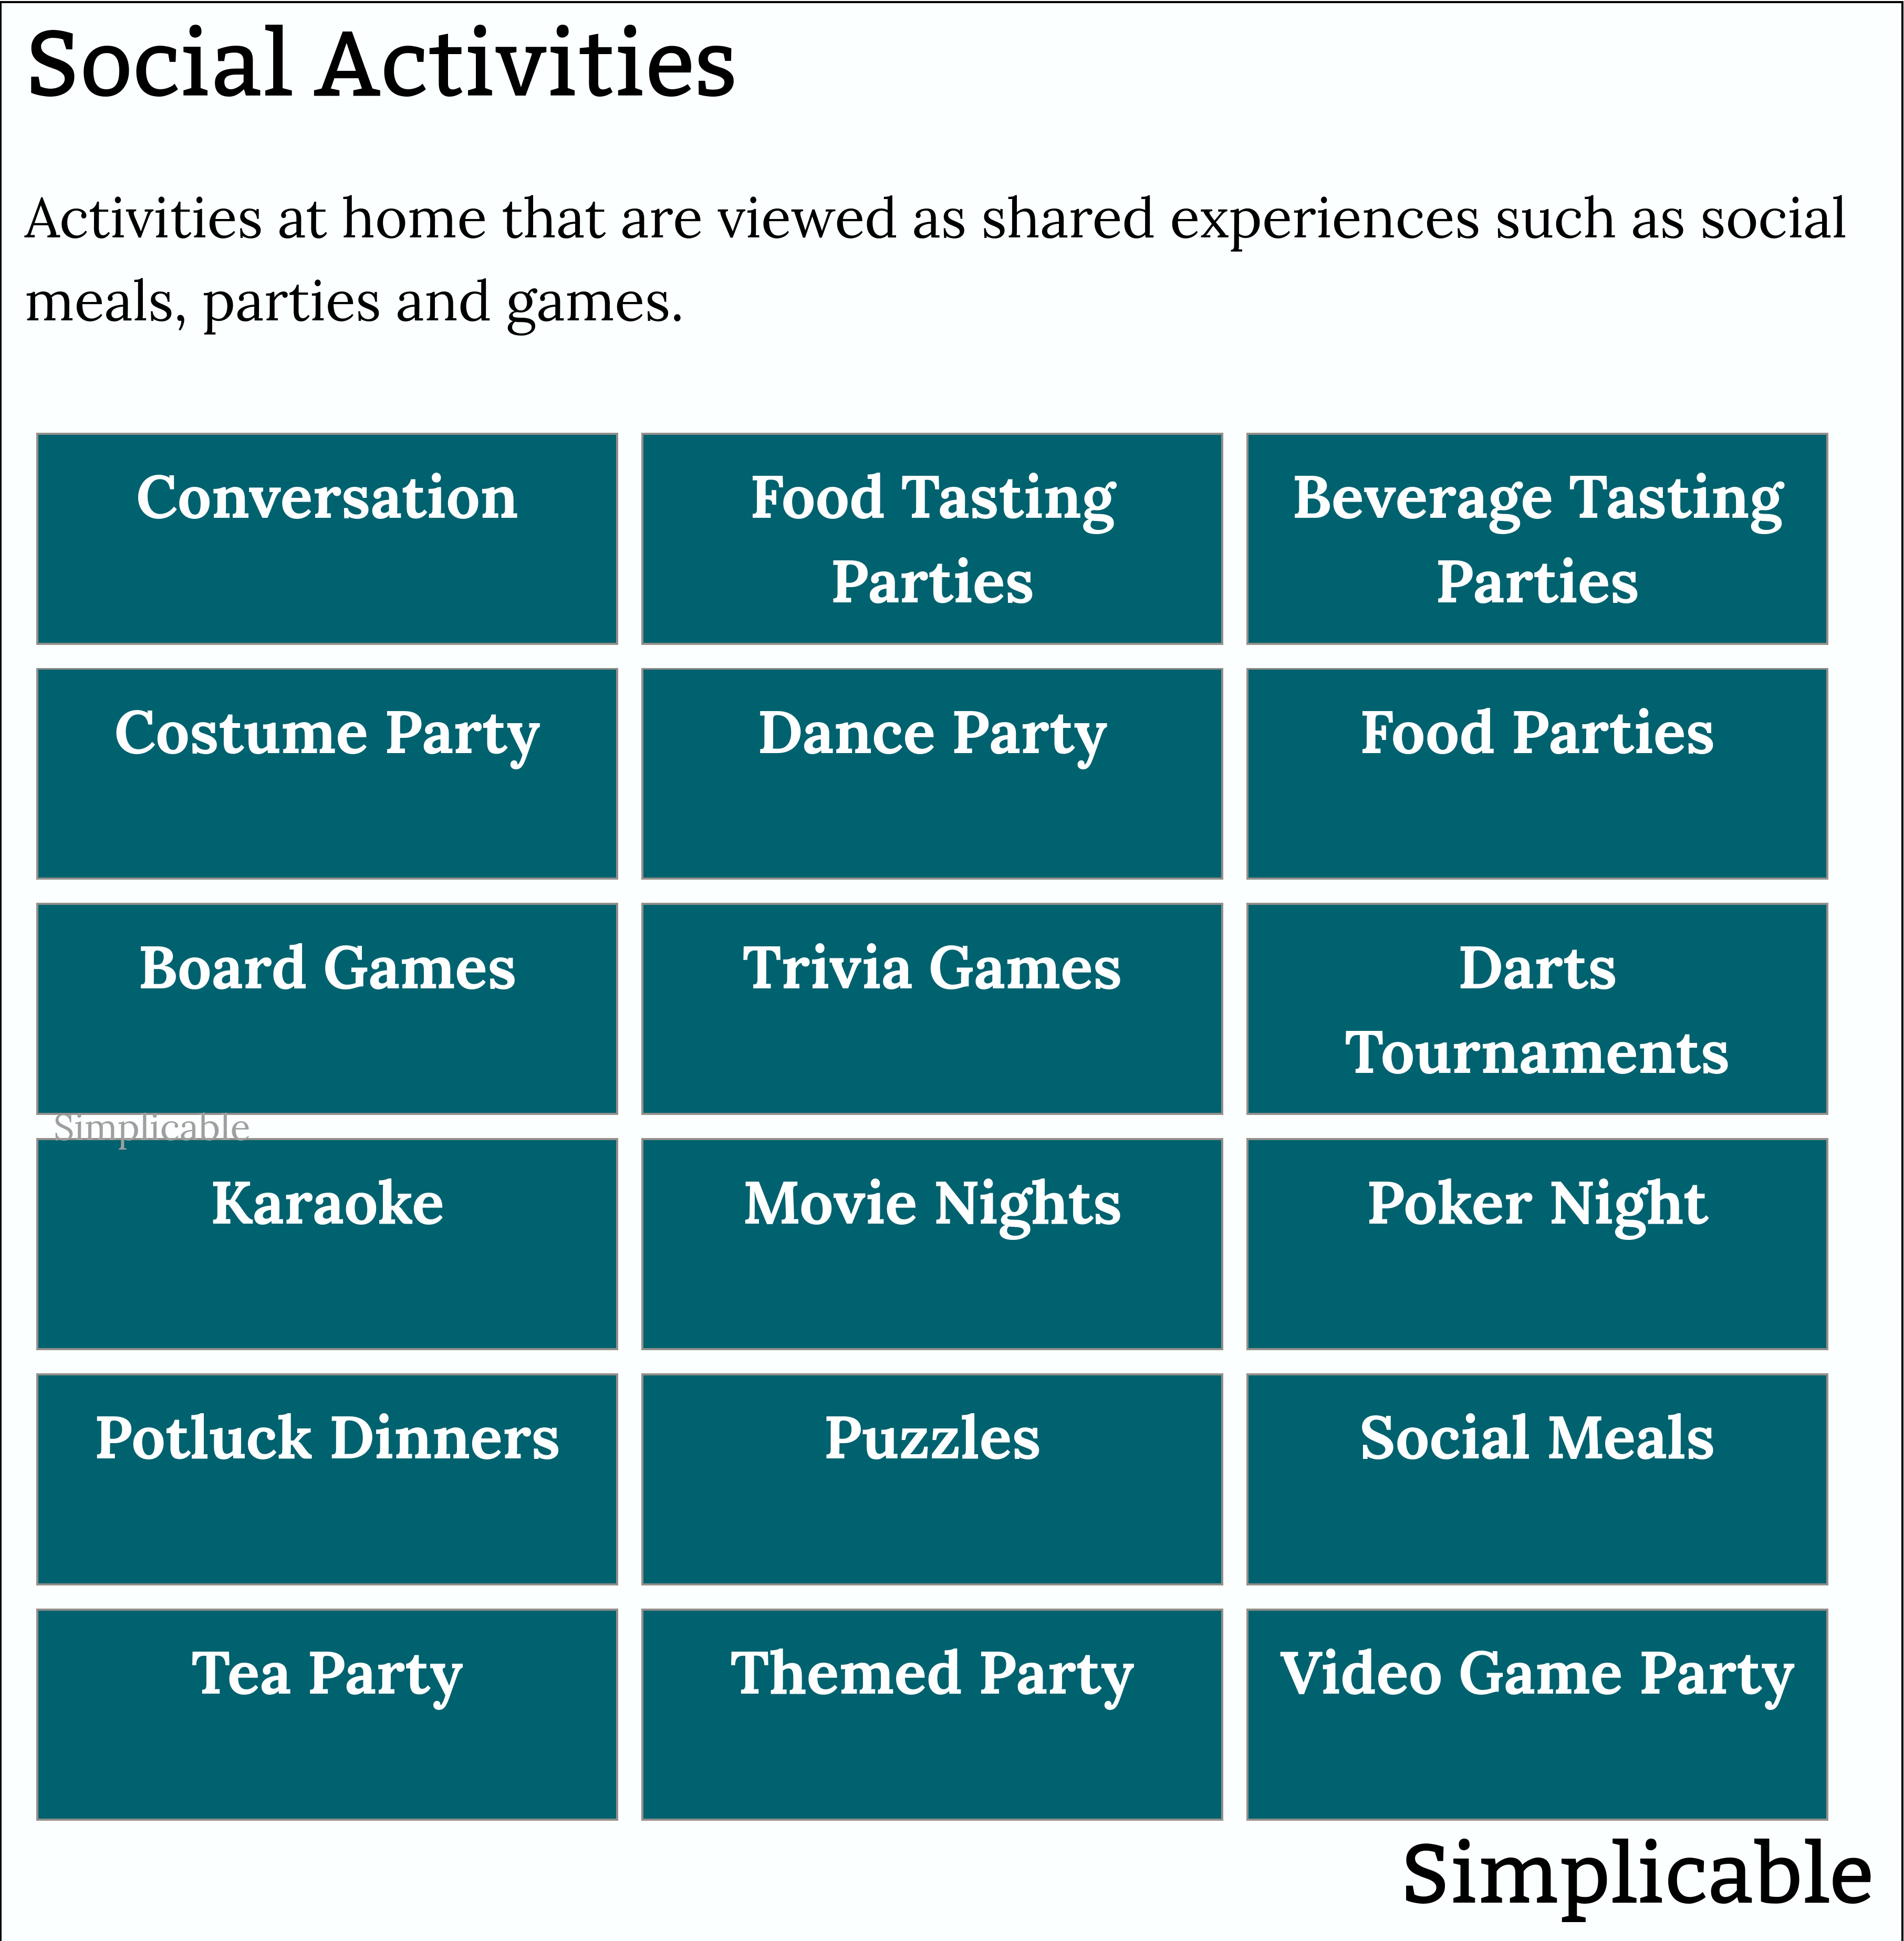 examples of social activities at home